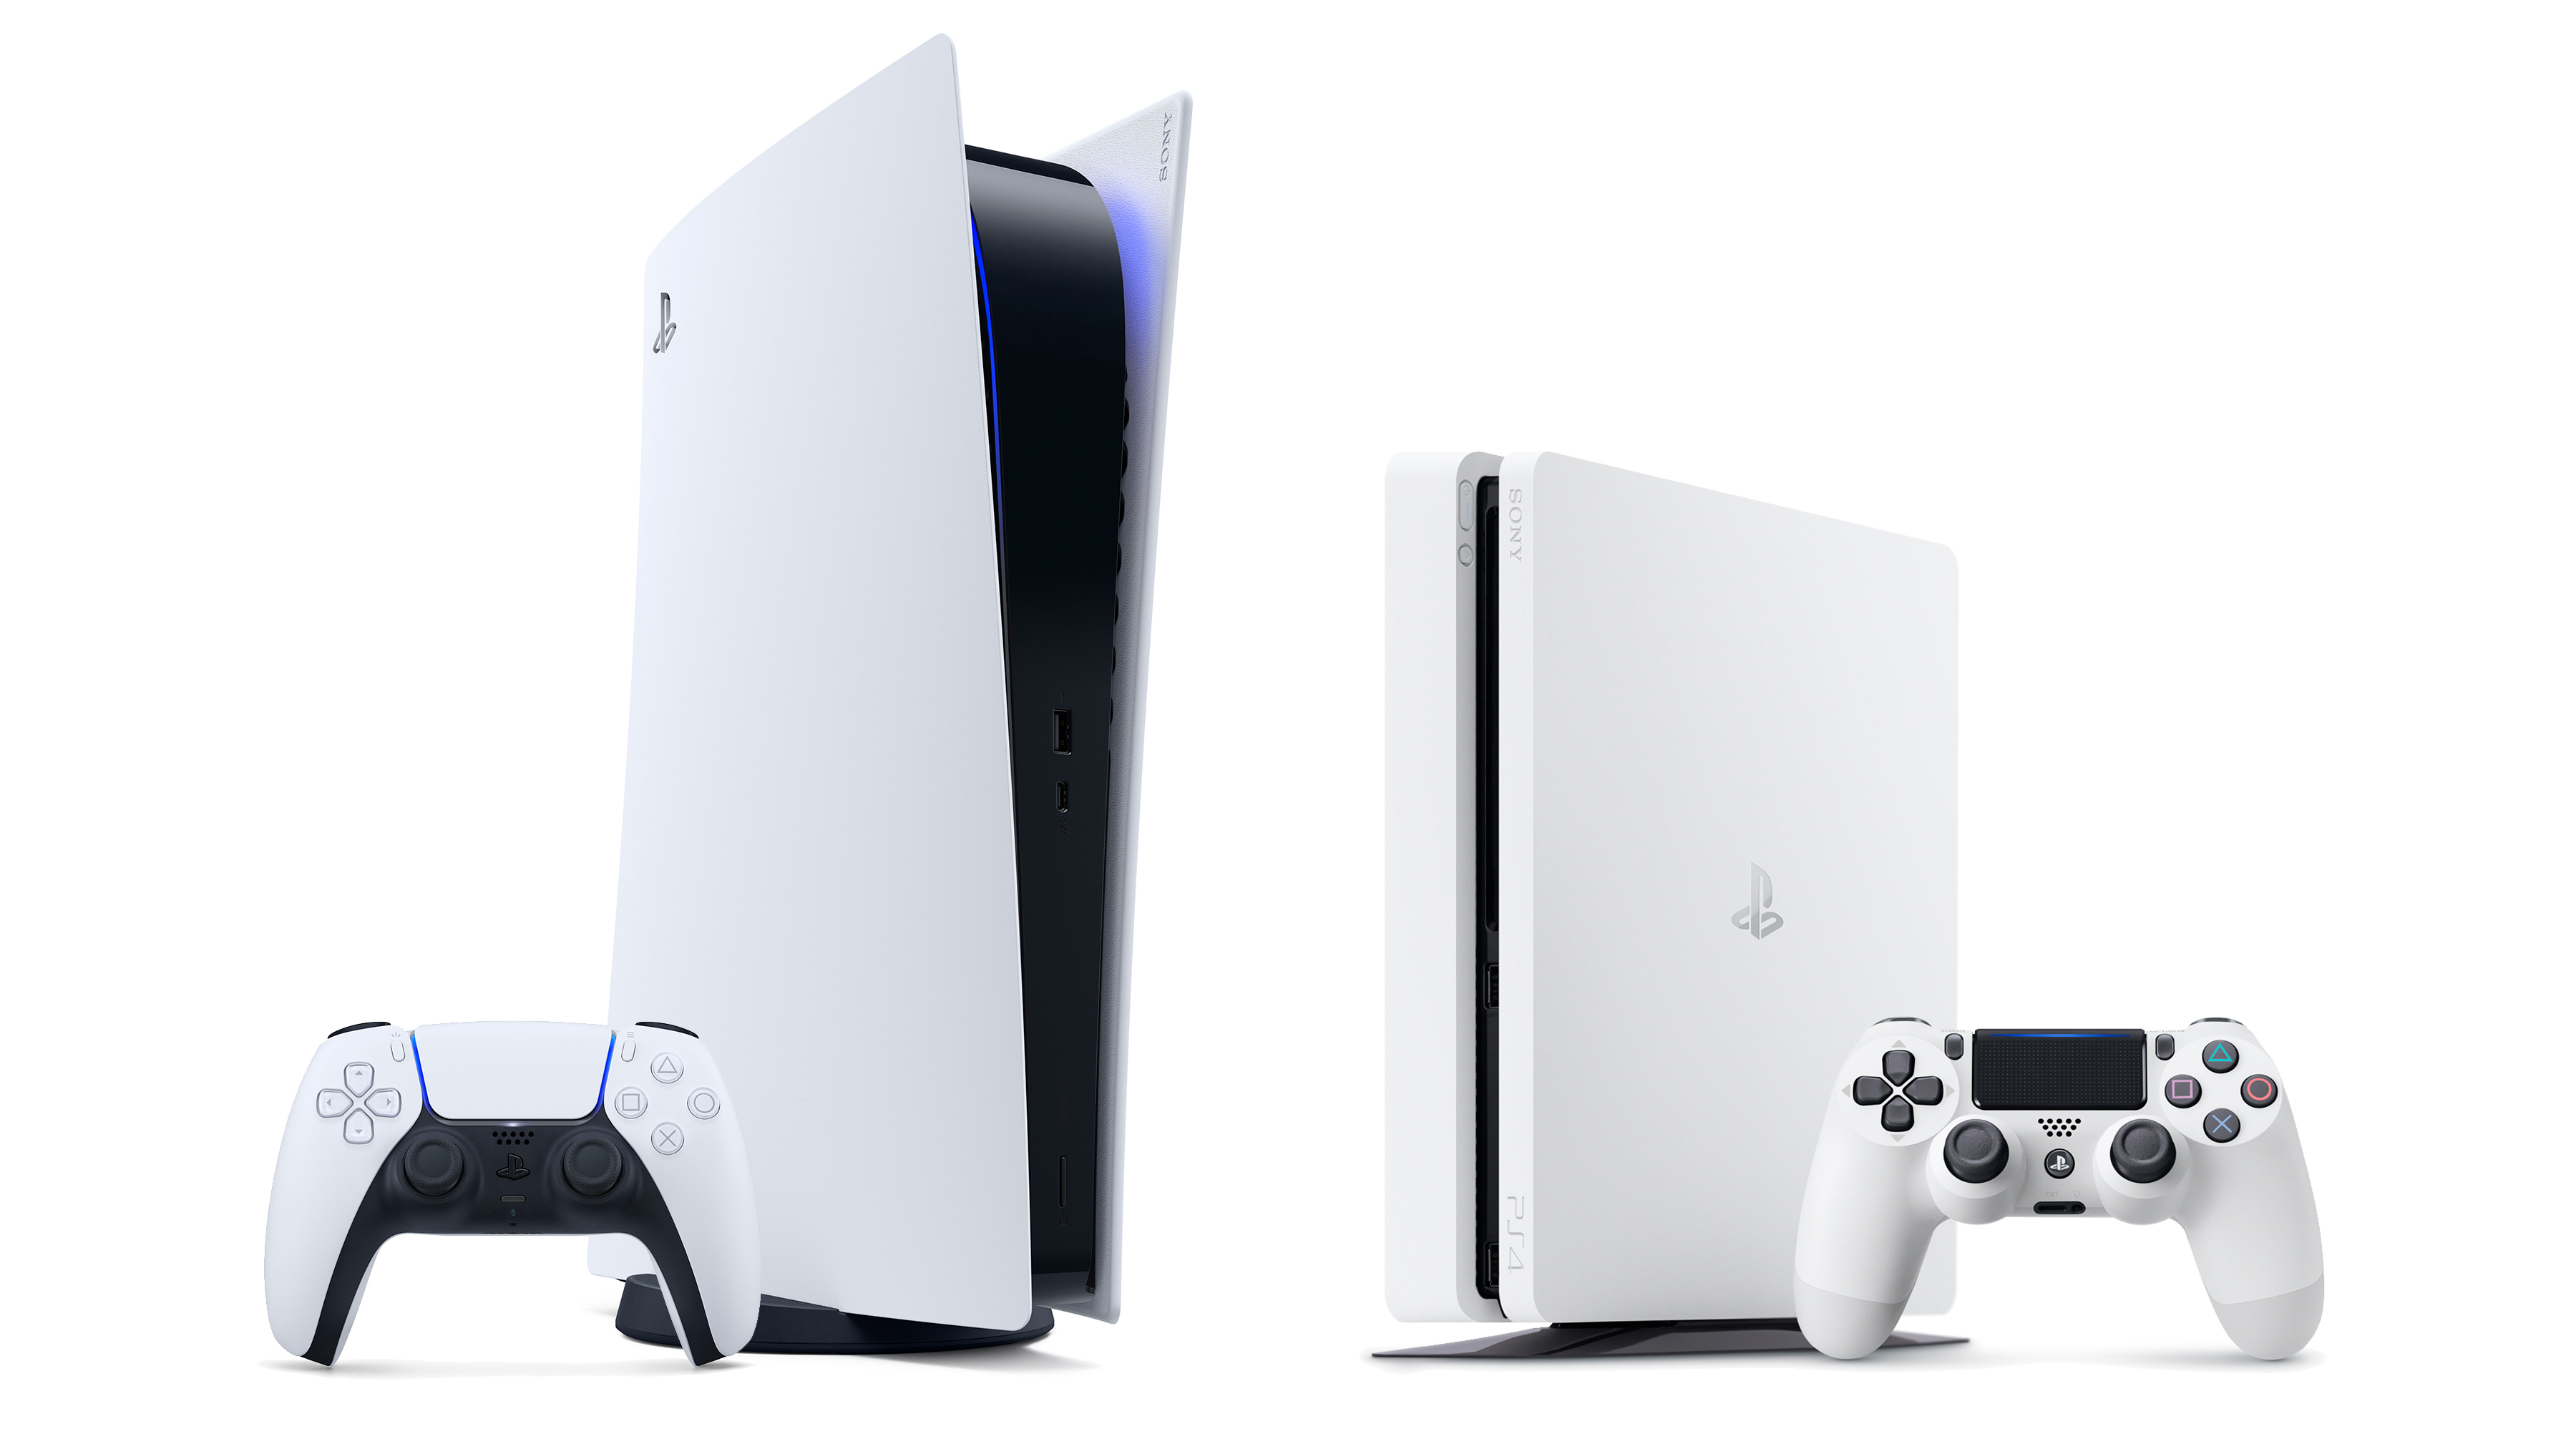 the REAL new PS5 is PS4 